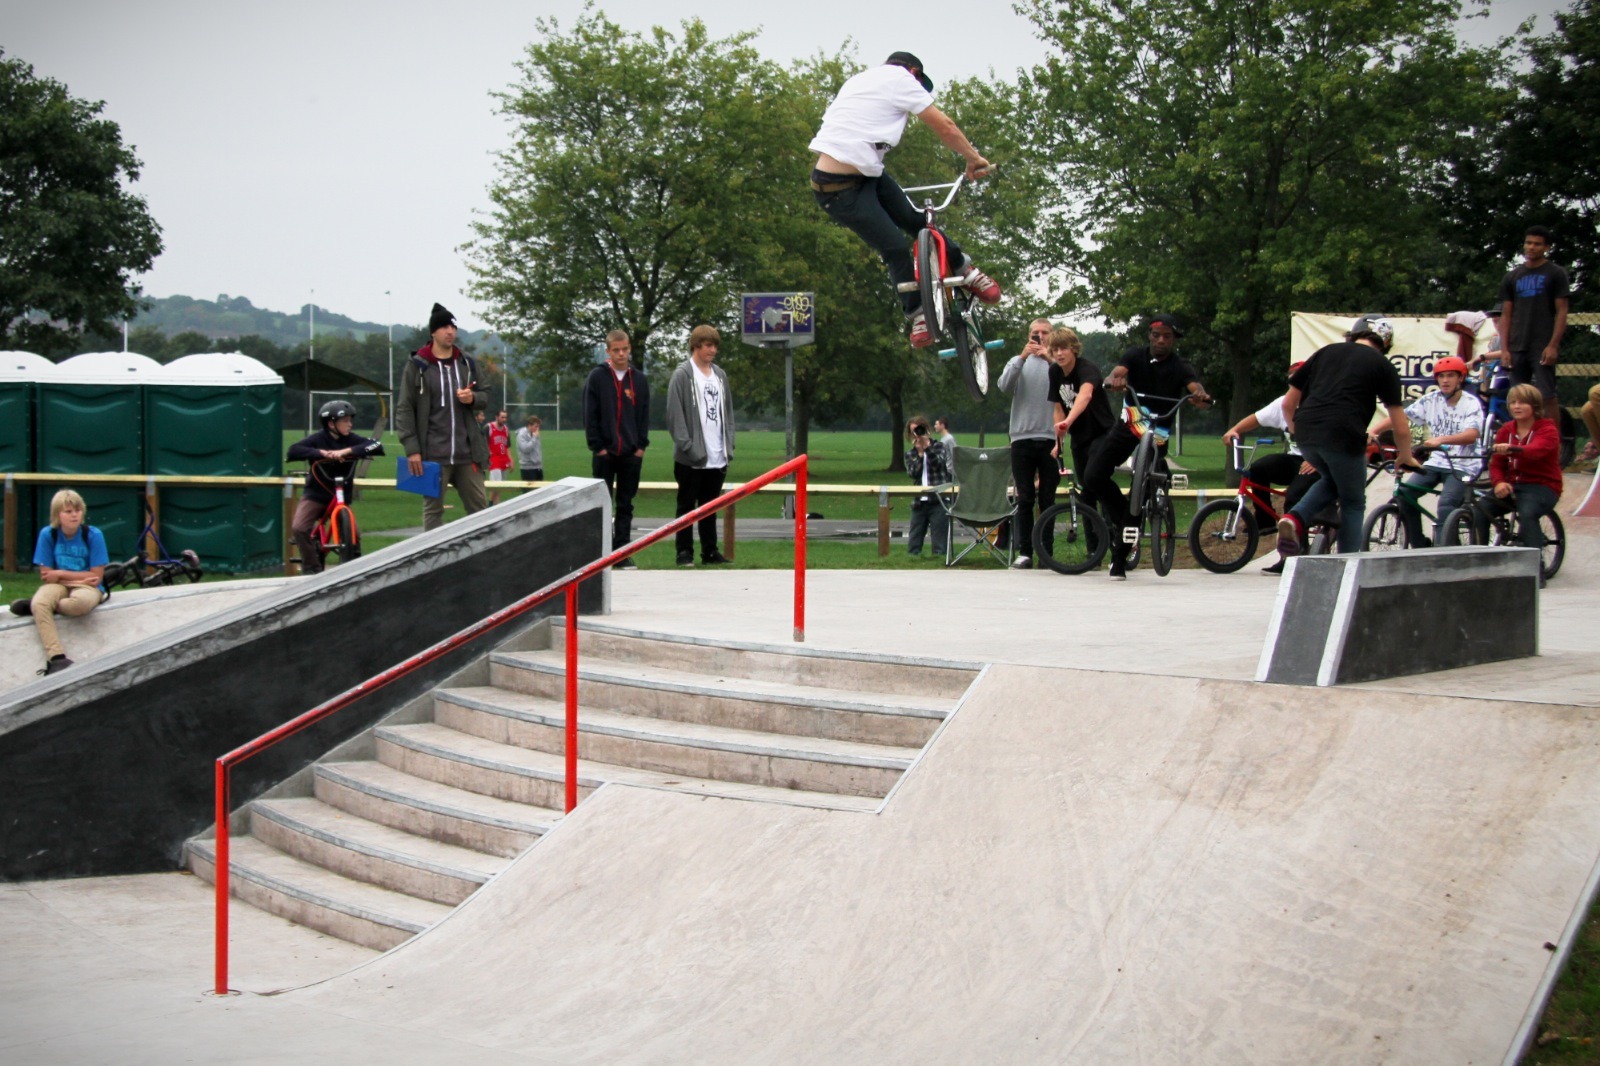  Jamie Skinner (up rail double peg to clicked 180 lookback . . . that rail is proper street size BTW!) - DEATH Photo